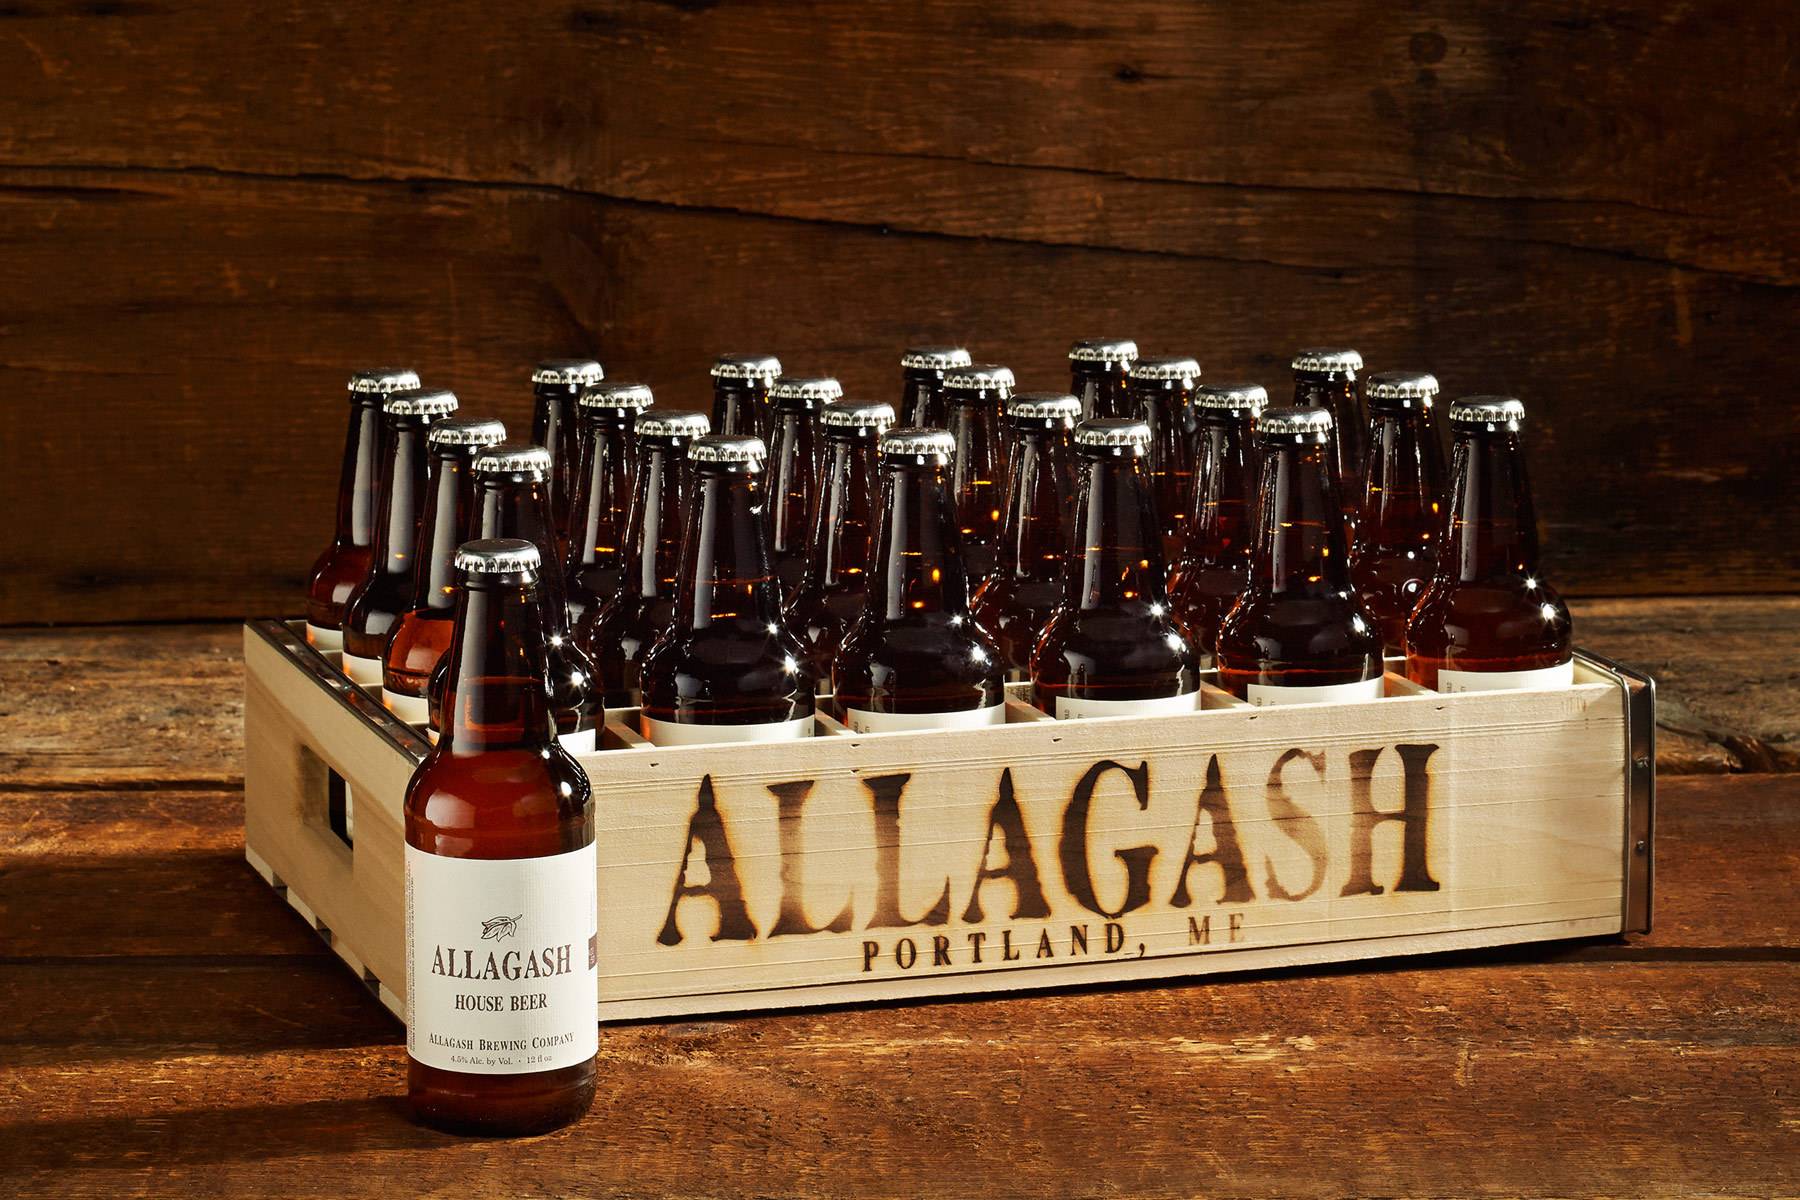 Allagash House Beer